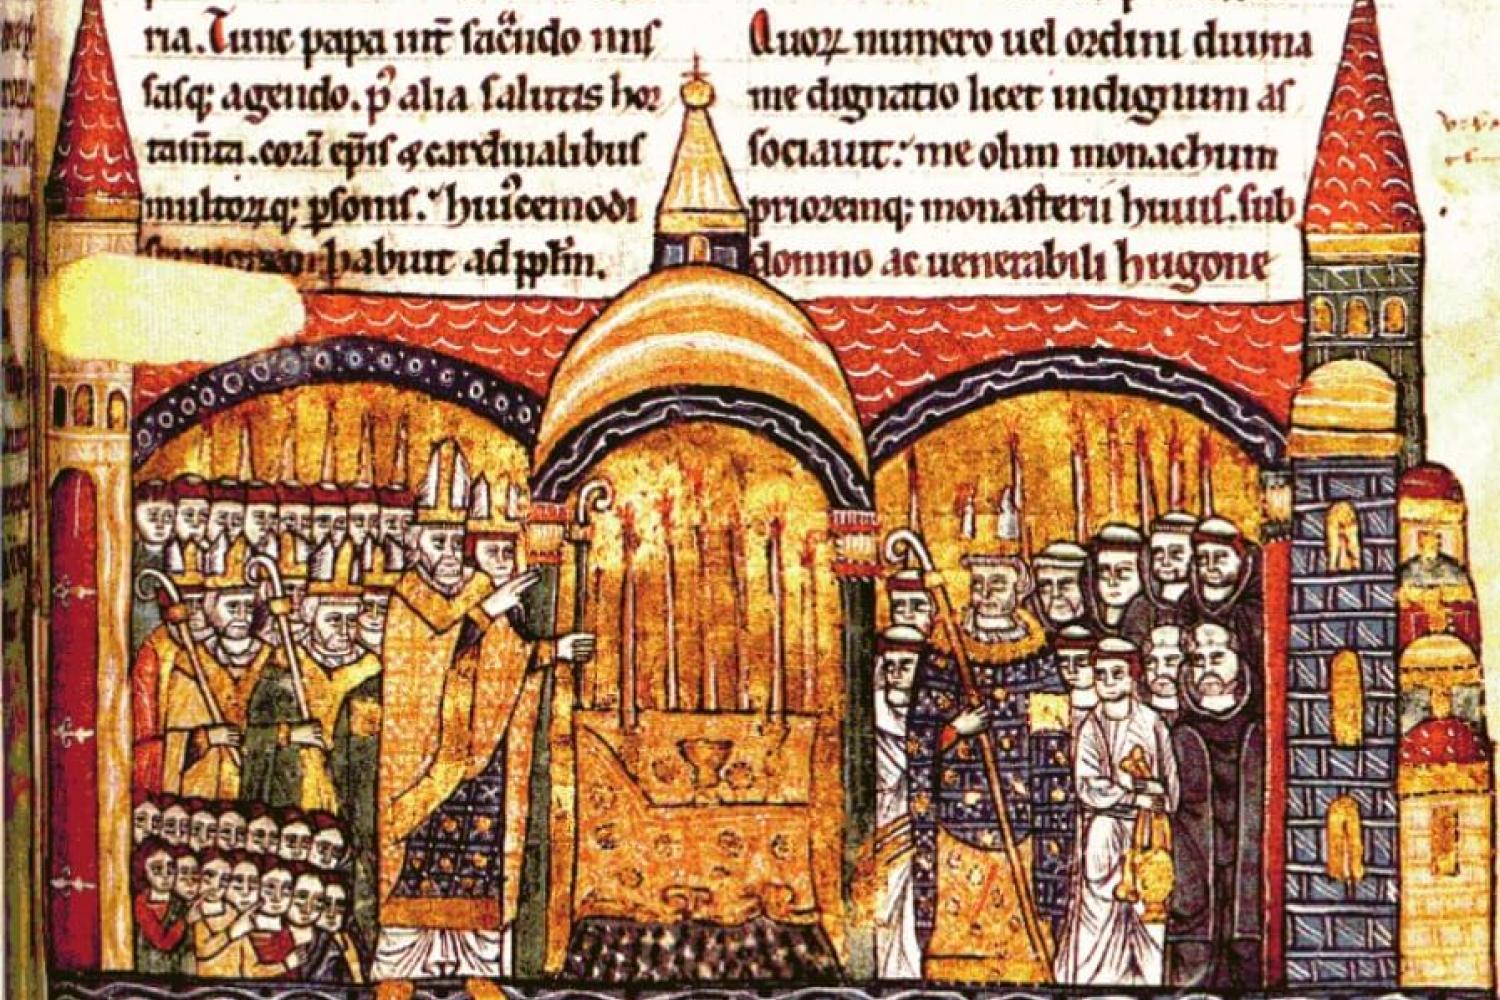 The Consecration of Cluny III by Pope Urban II, 12th century (Bibliothèque Nationale de France).